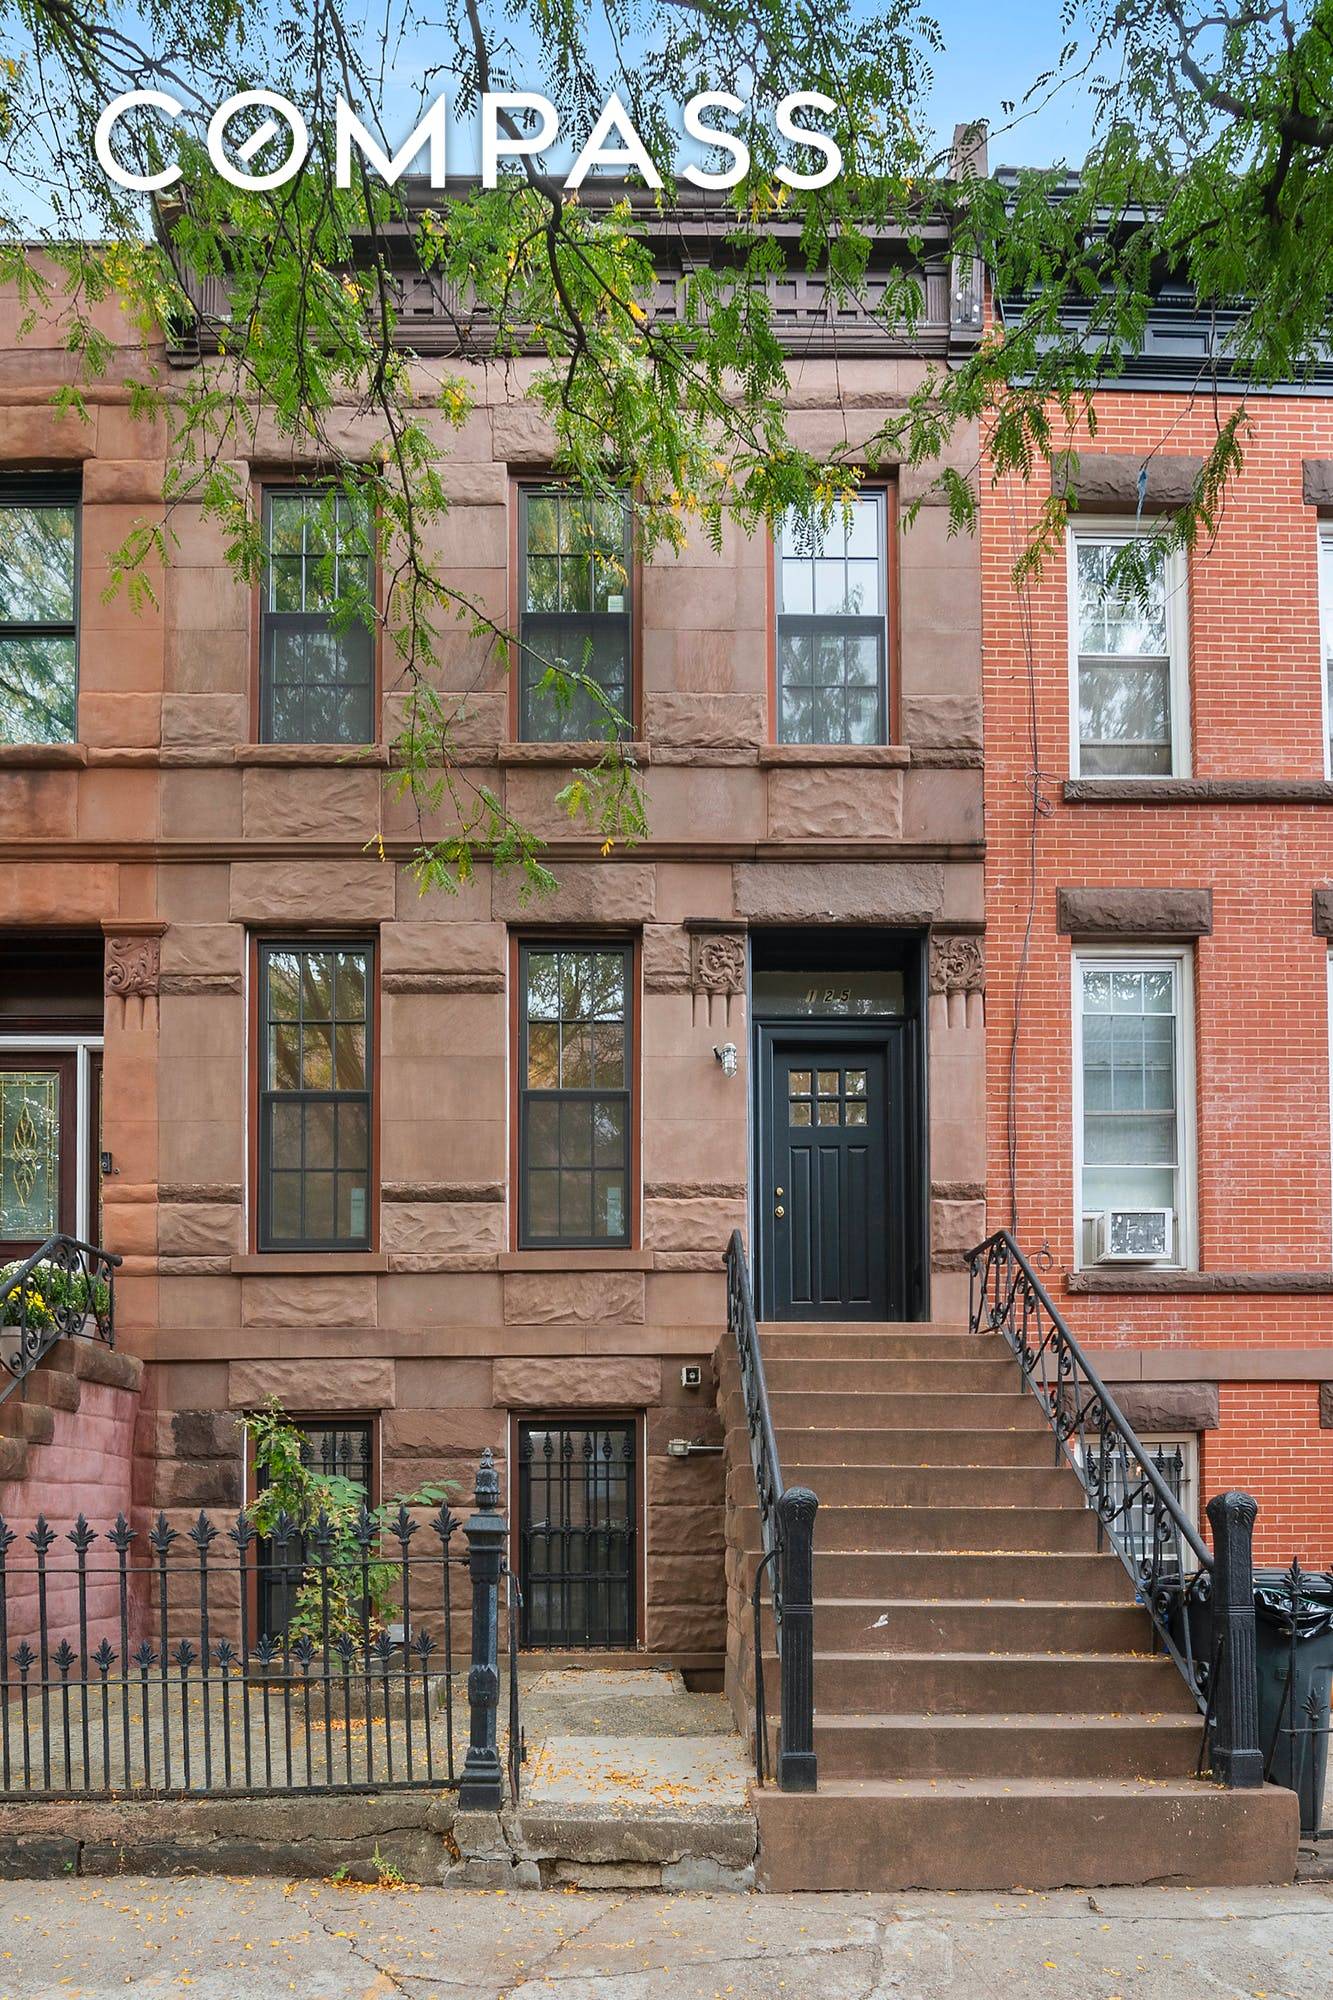 COMING SOON RENOVATED TWO FAMILY BED STUY BROWNSTONE